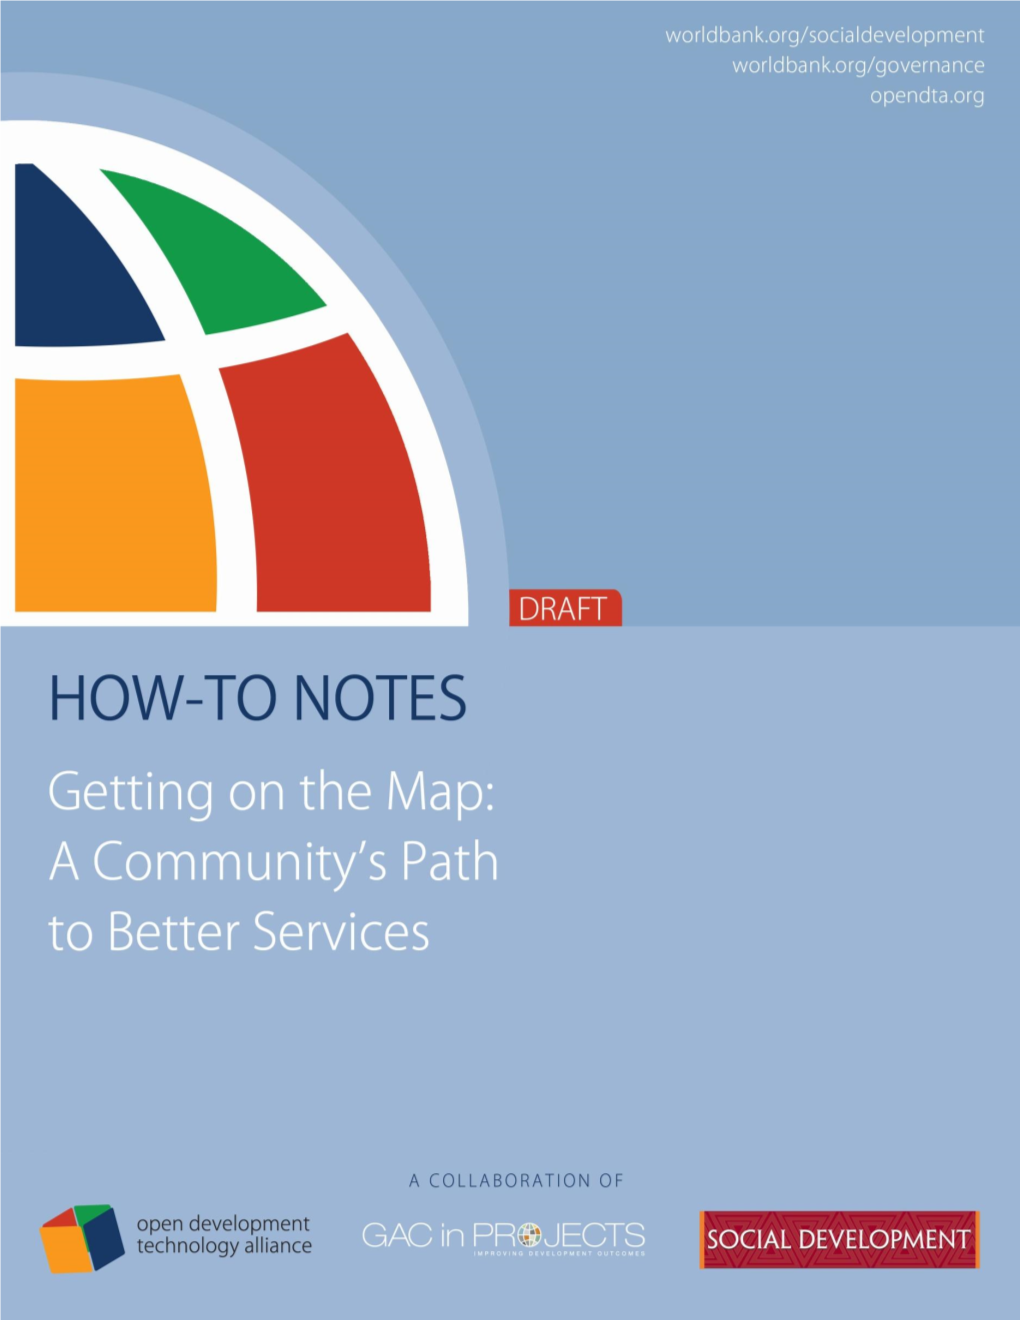 Getting on the Map: a Community's Path to Better Services